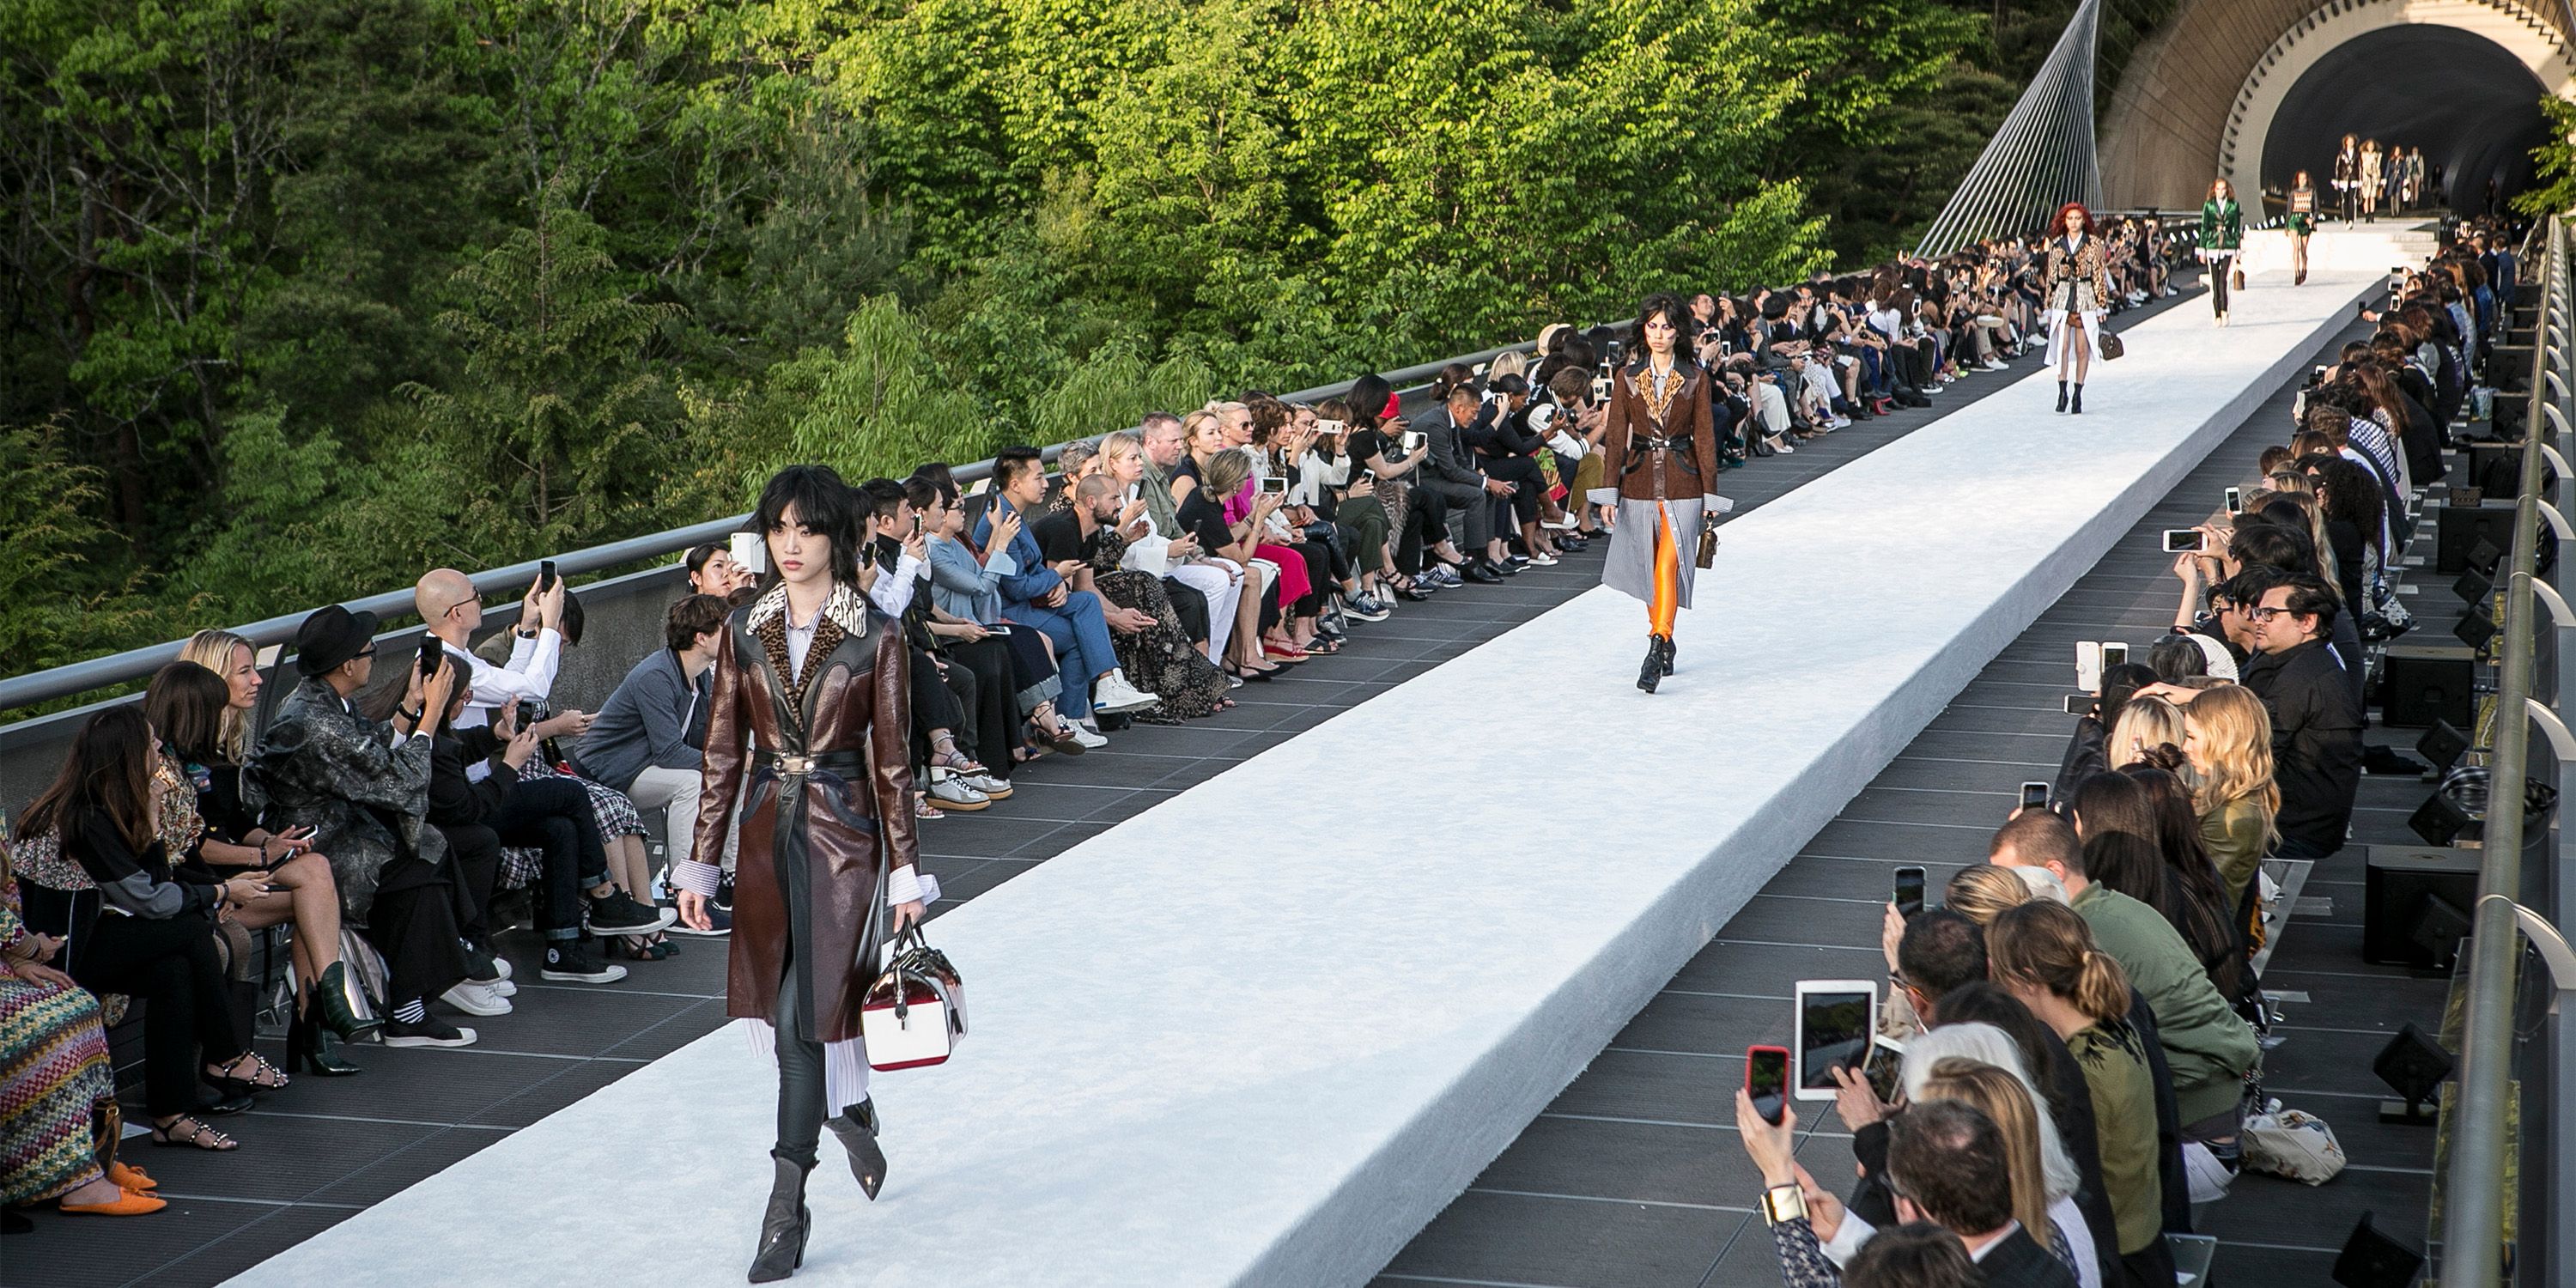 Louis Vuitton's Cruise 2018 Collection: An Homage To Japan